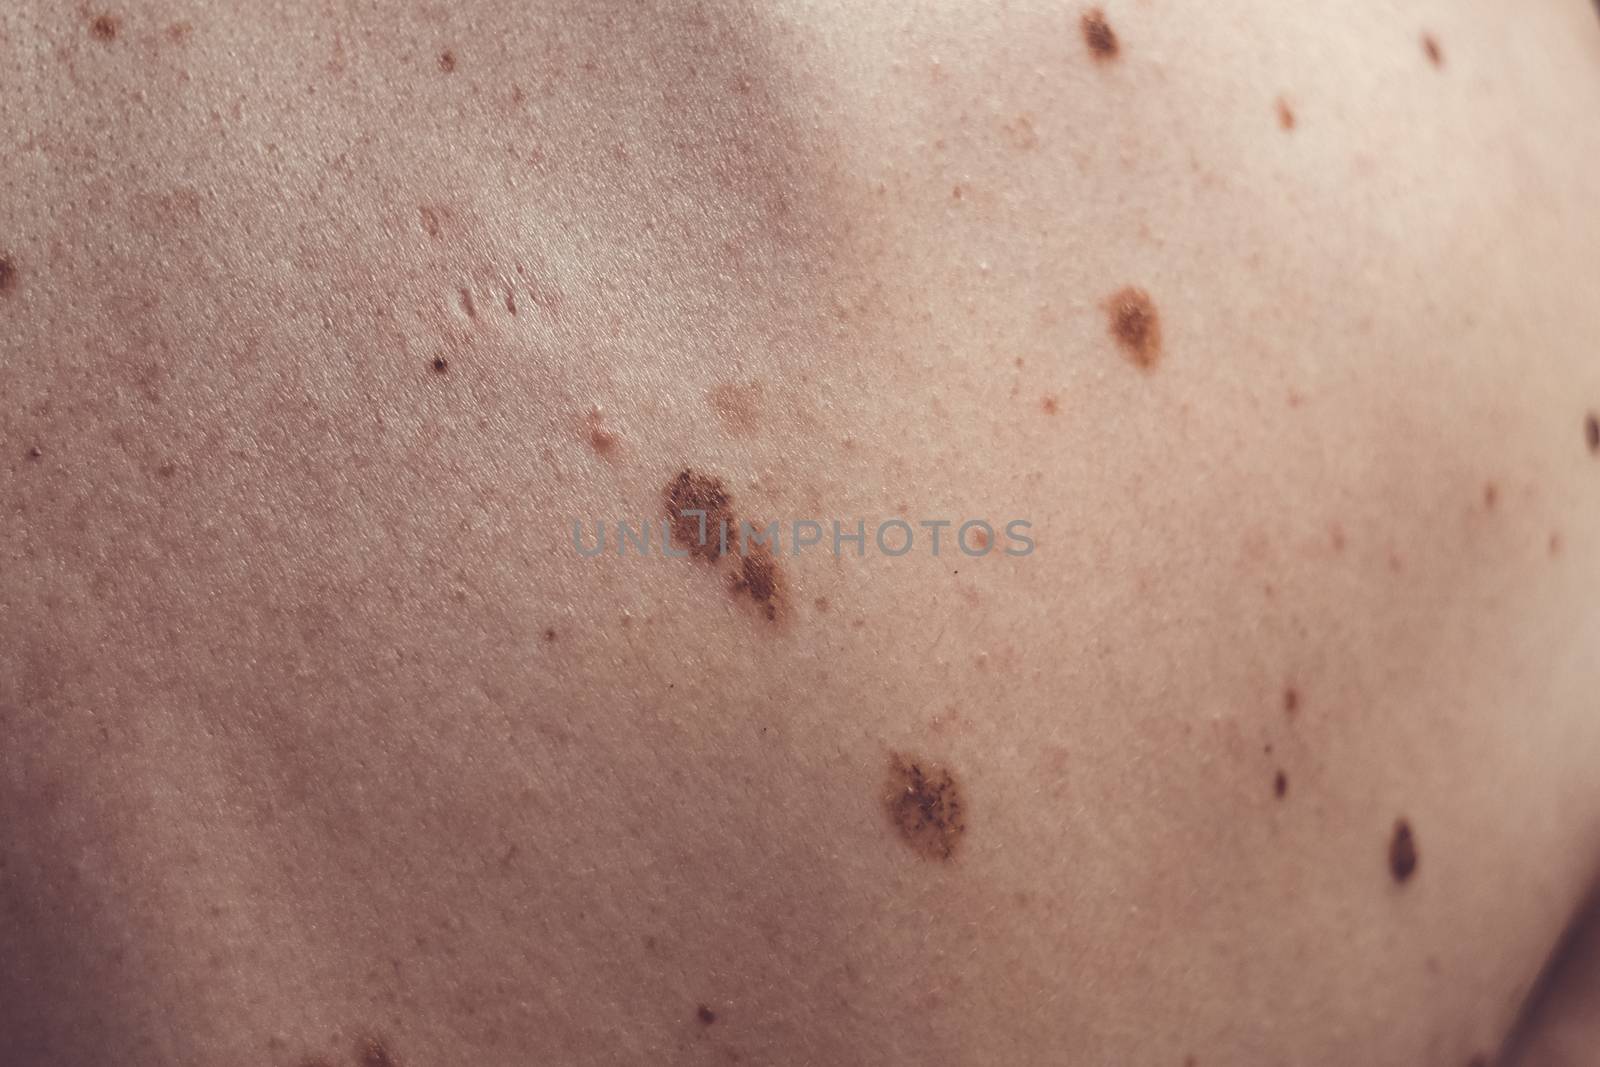 Melanocytic nevus, some of them dyplastic or atypical, on a caucasian man of 37 years old from Spain by mikelju